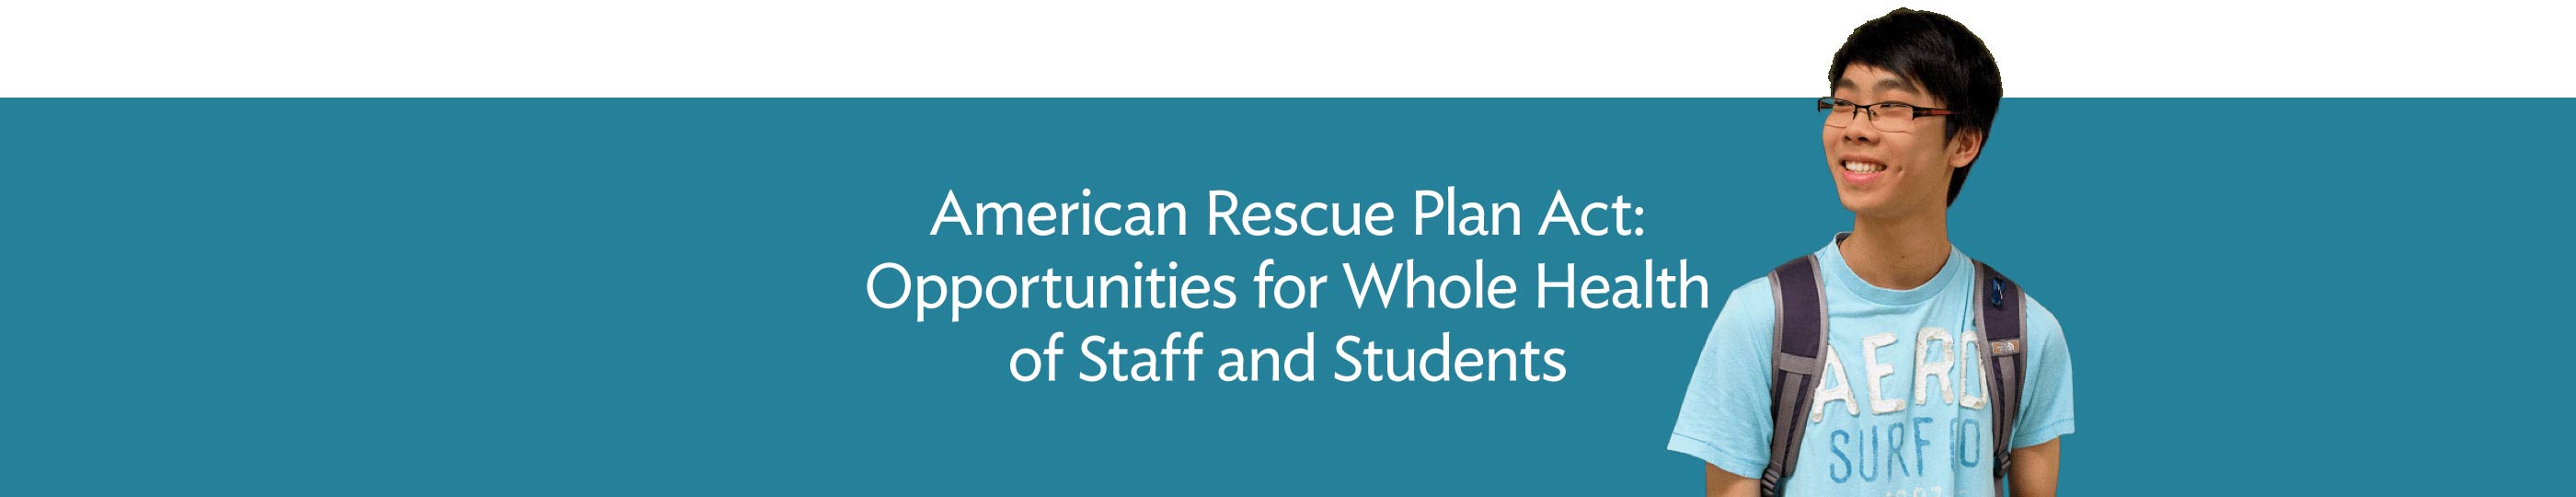 American Rescue Plan Act Implementation